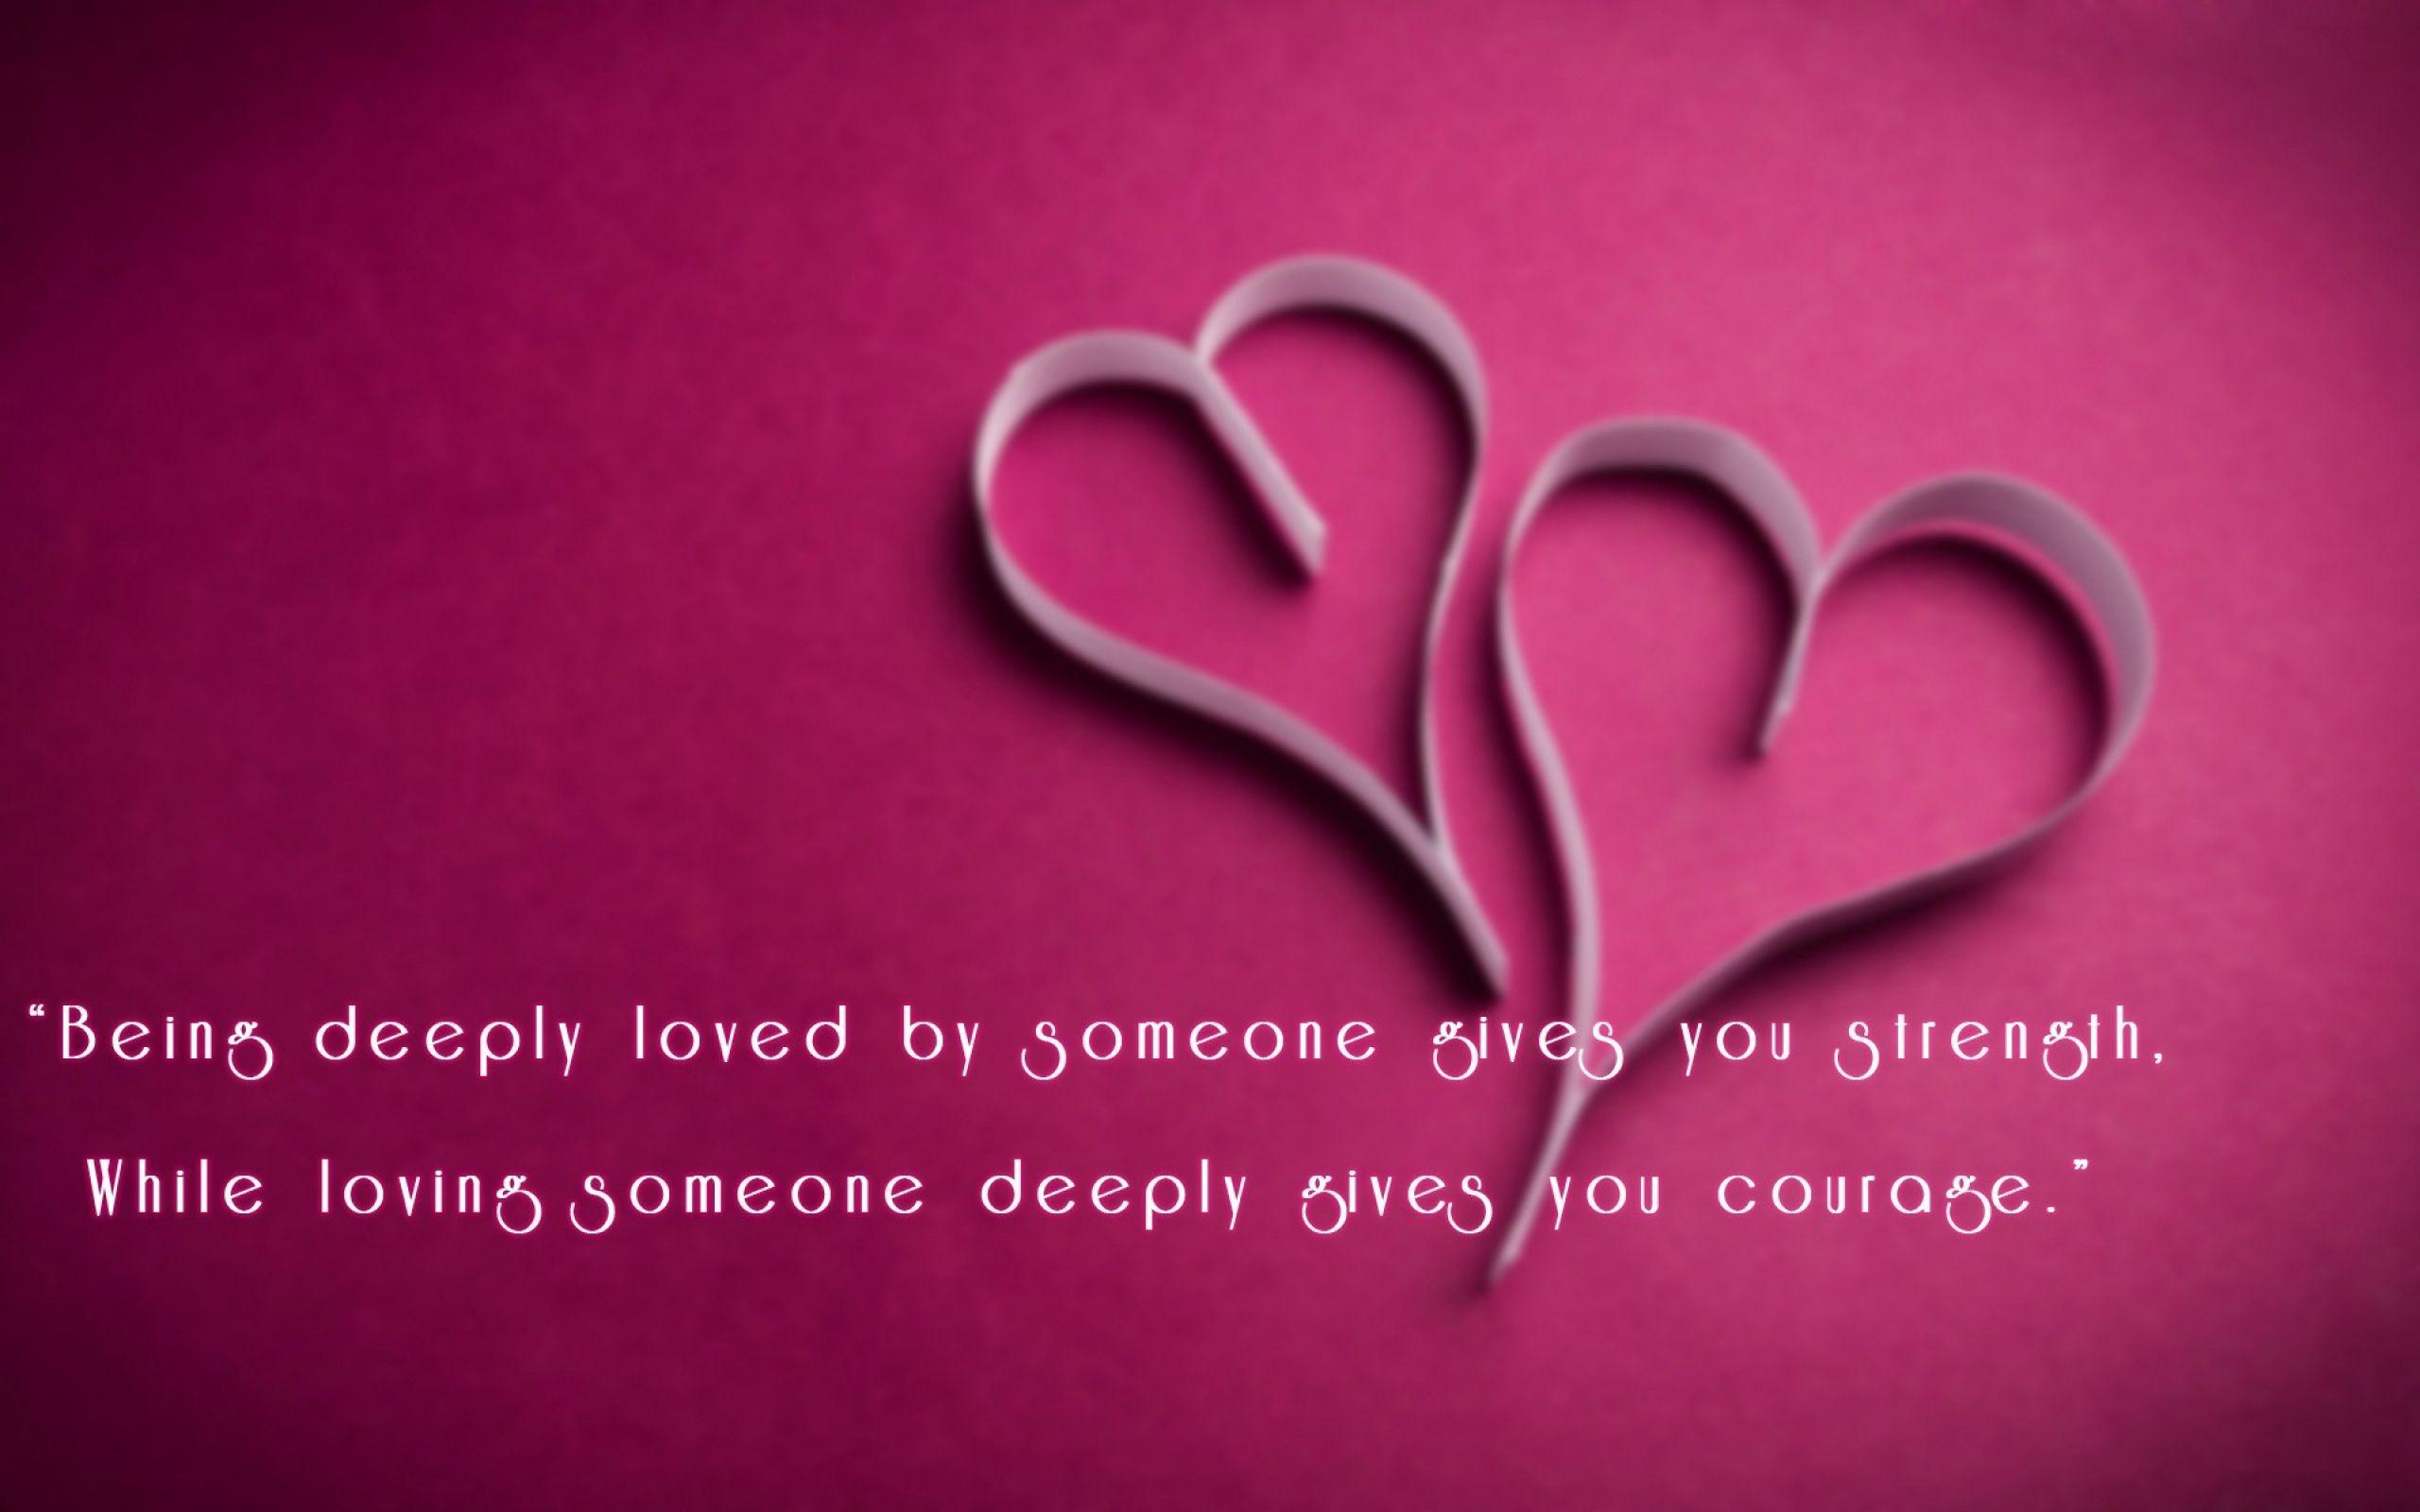 Love Quotes Wallpaper Free Download HD wide range